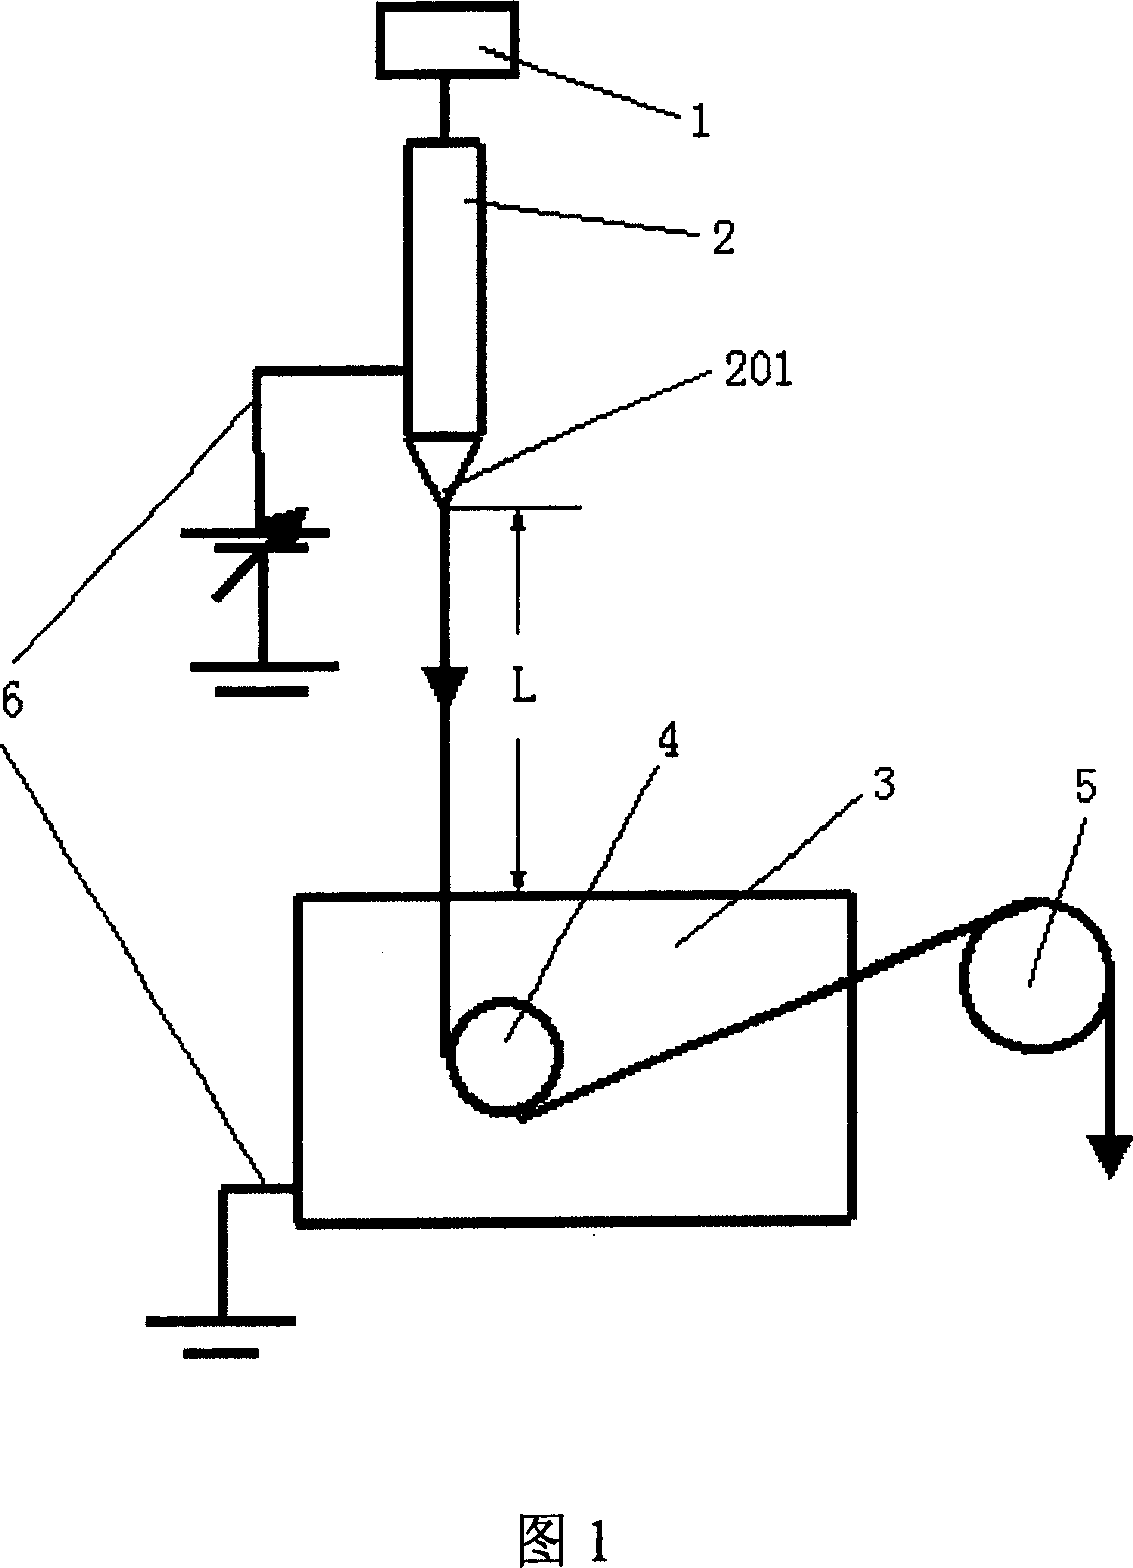 Static spinning device and its industrial use